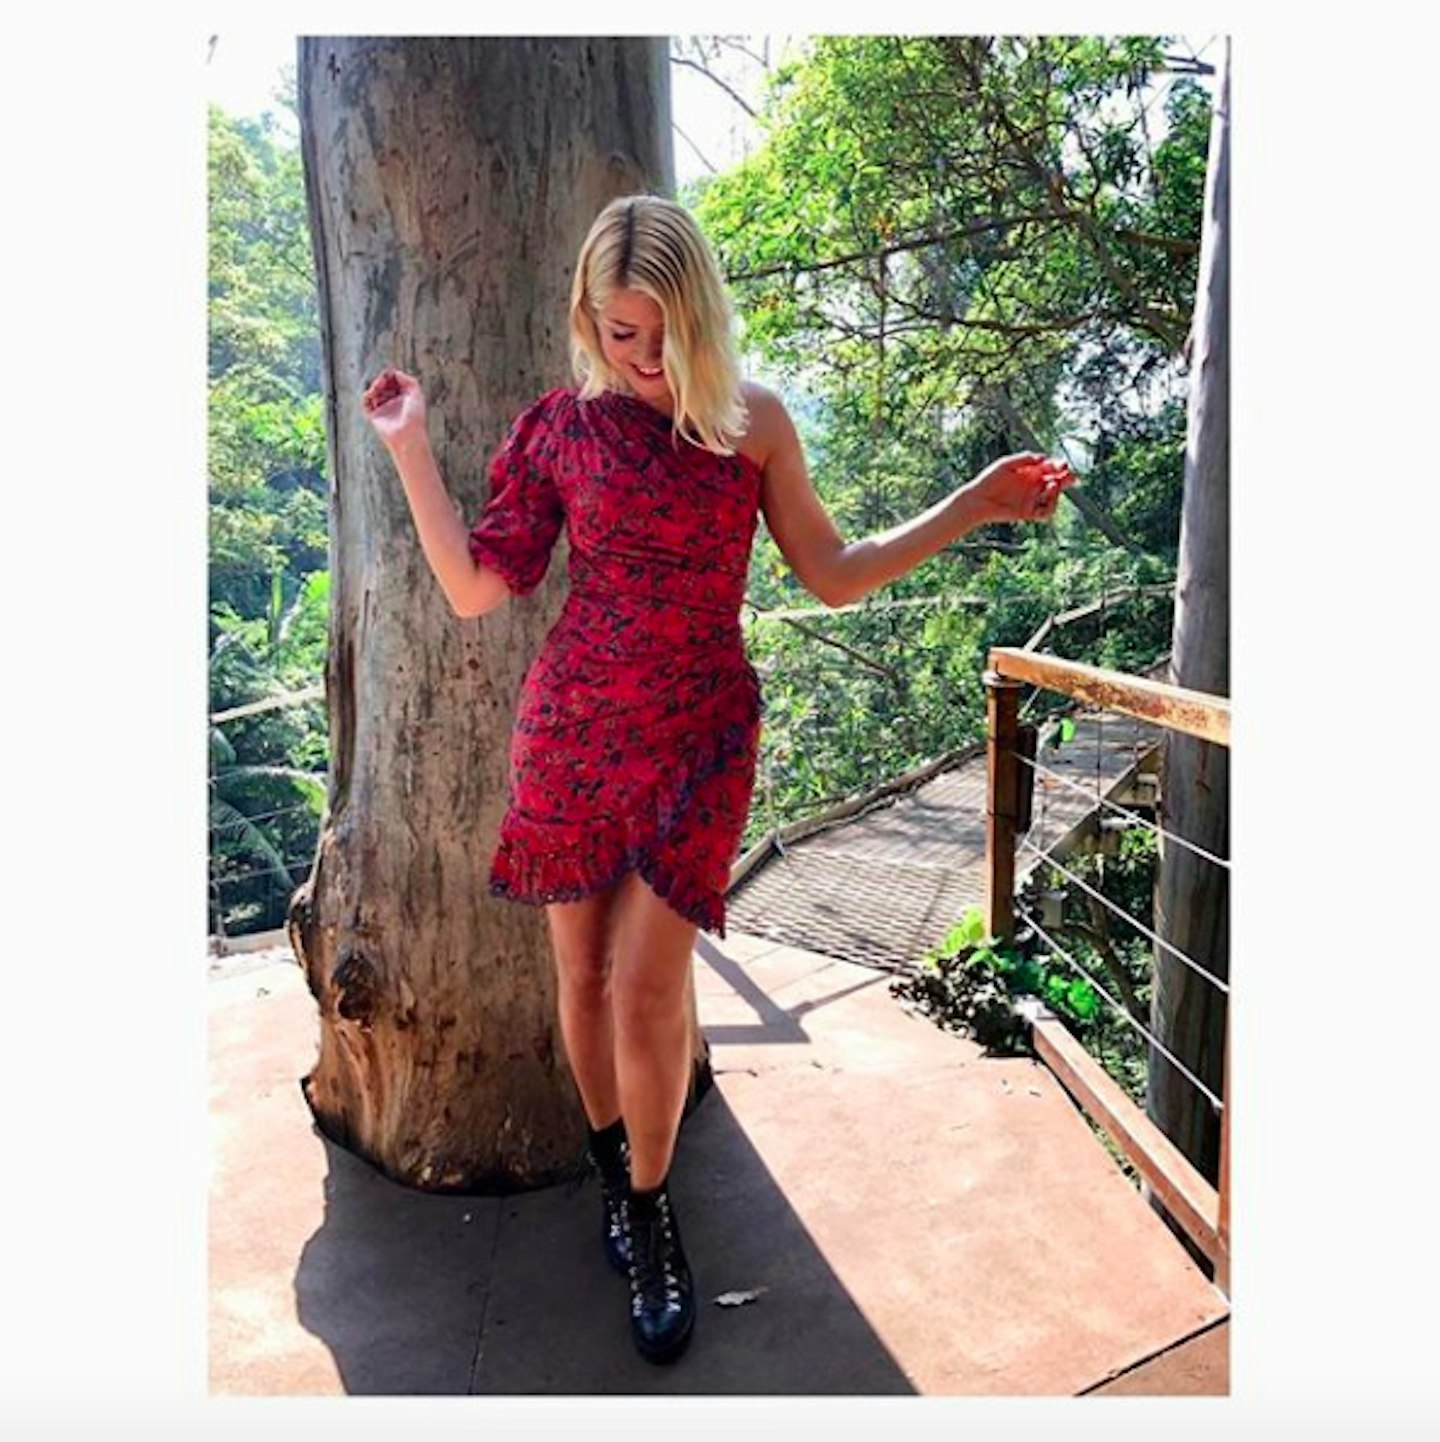 holly willoughby im a celeb outfit 1 december 2018